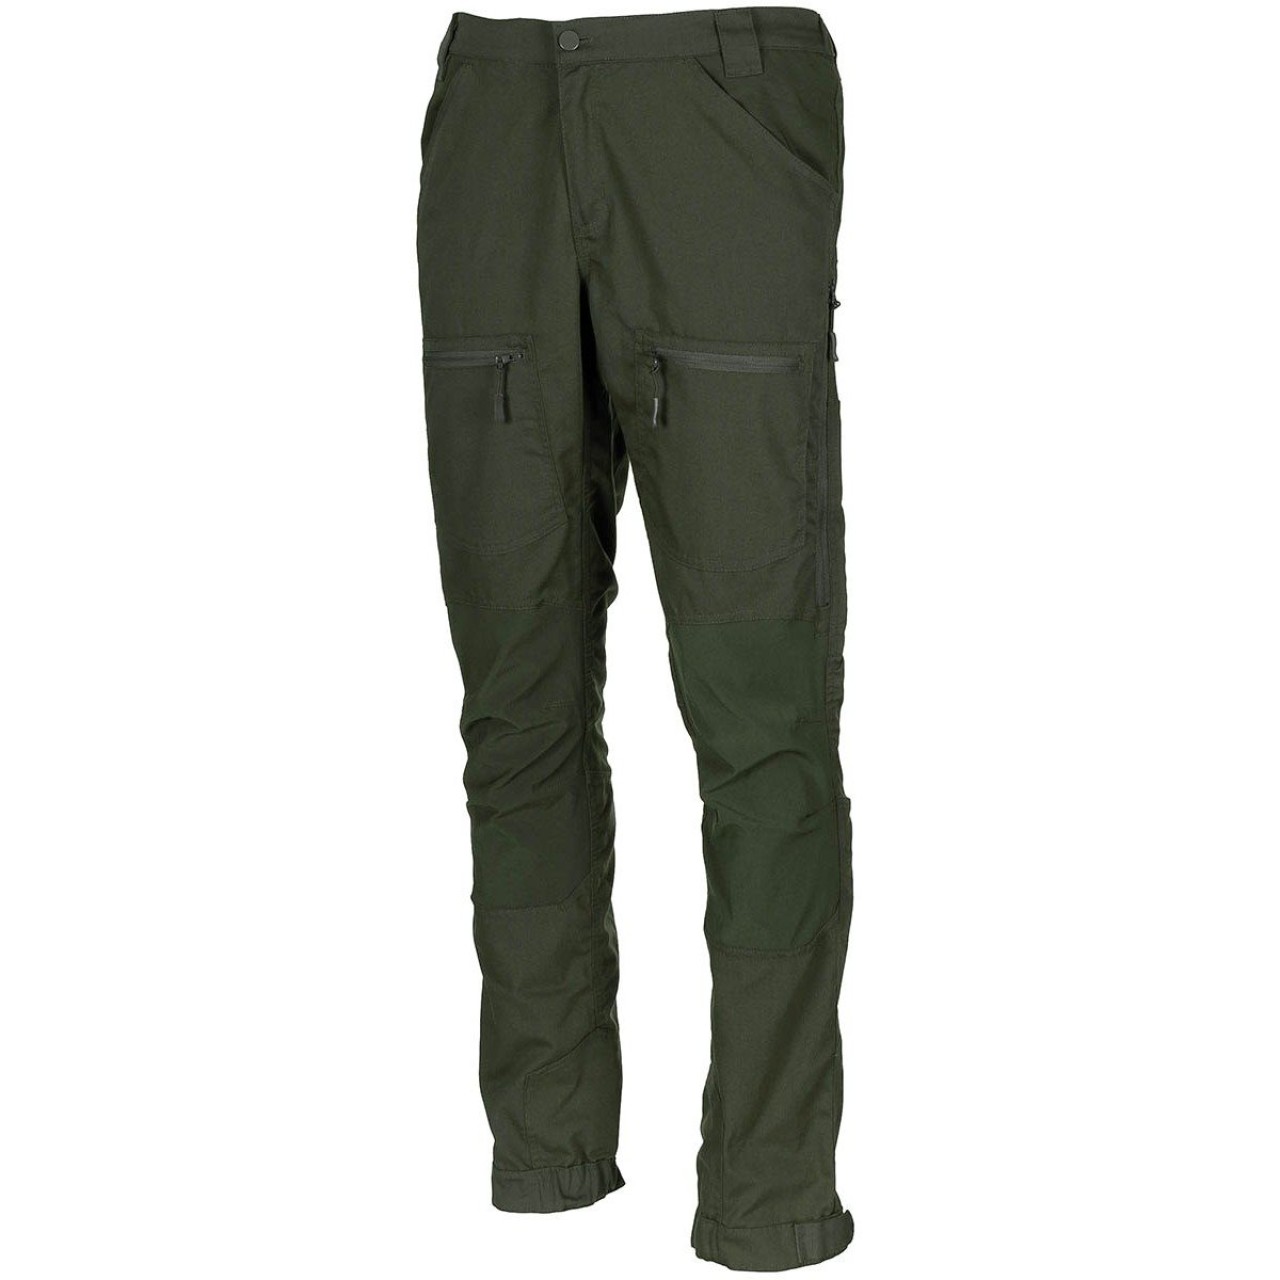 Nohavice EXPEDITION outdoor OLIV